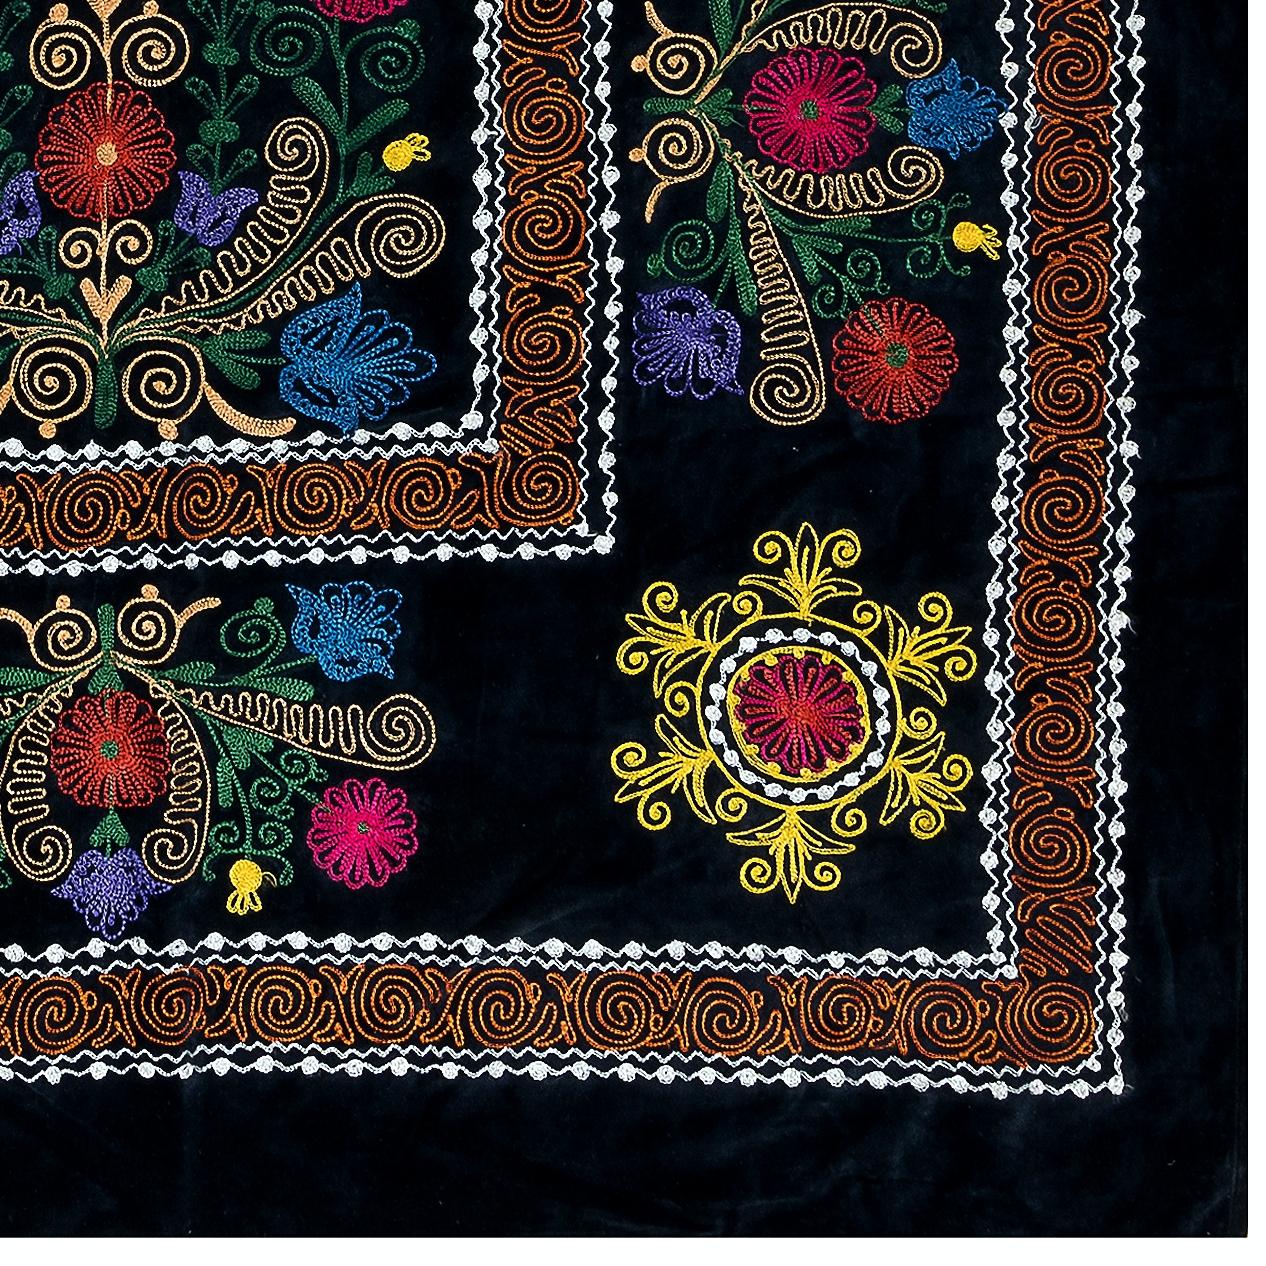 Uzbek 4.6x6.8 Ft Silk Embroidery Wall Hanging, Black Vintage Throw, Floral Tablecloth For Sale